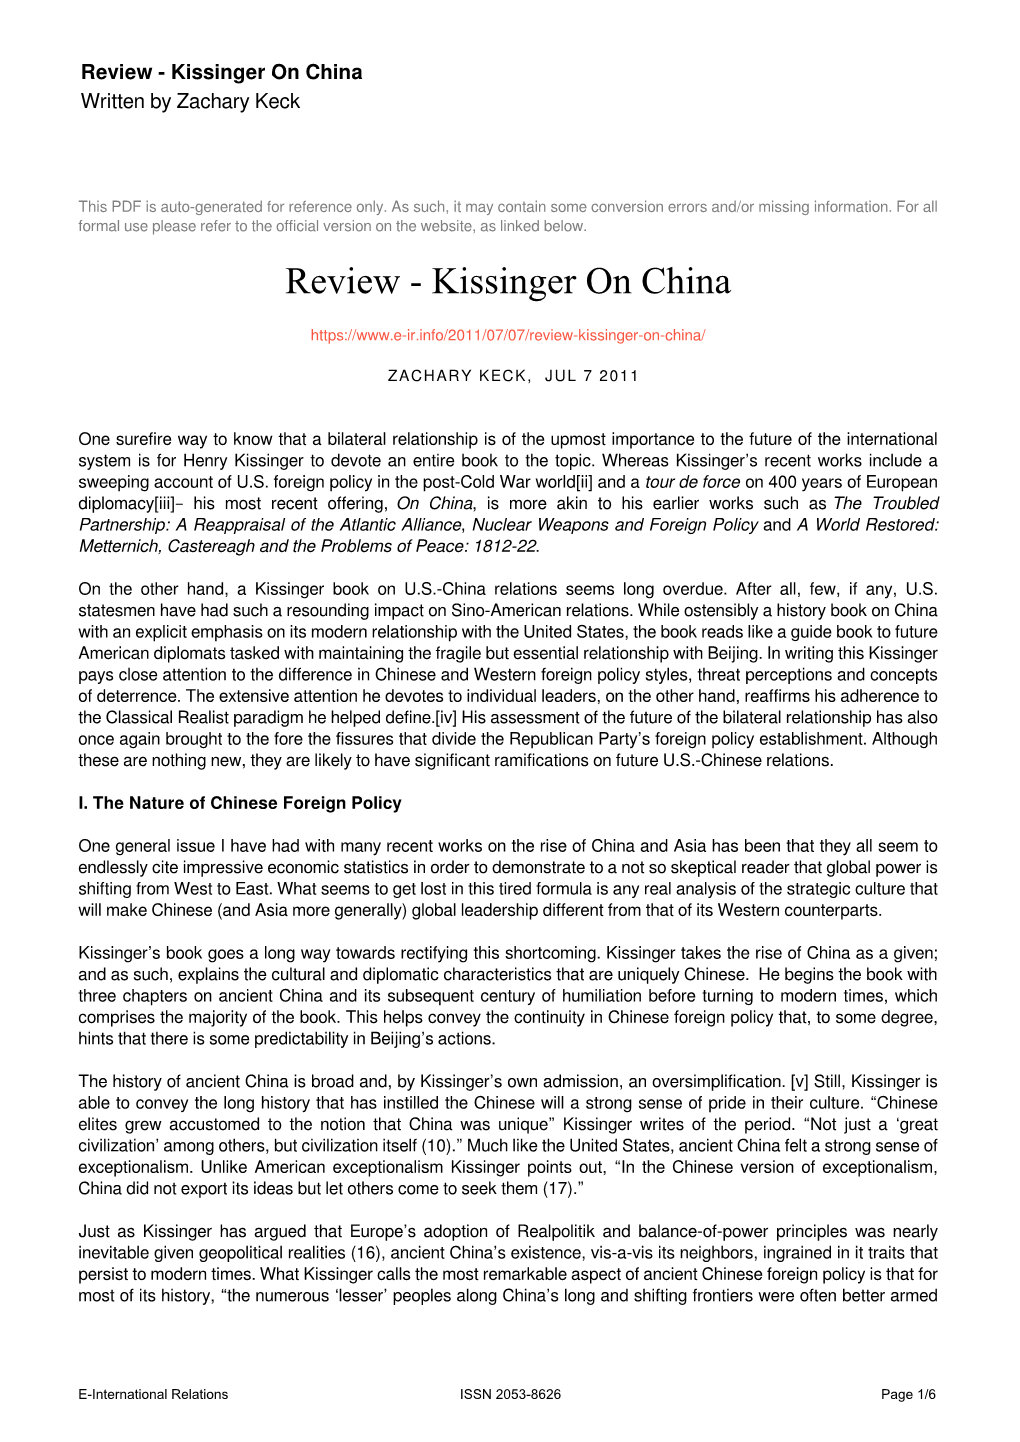 Kissinger on China Written by Zachary Keck